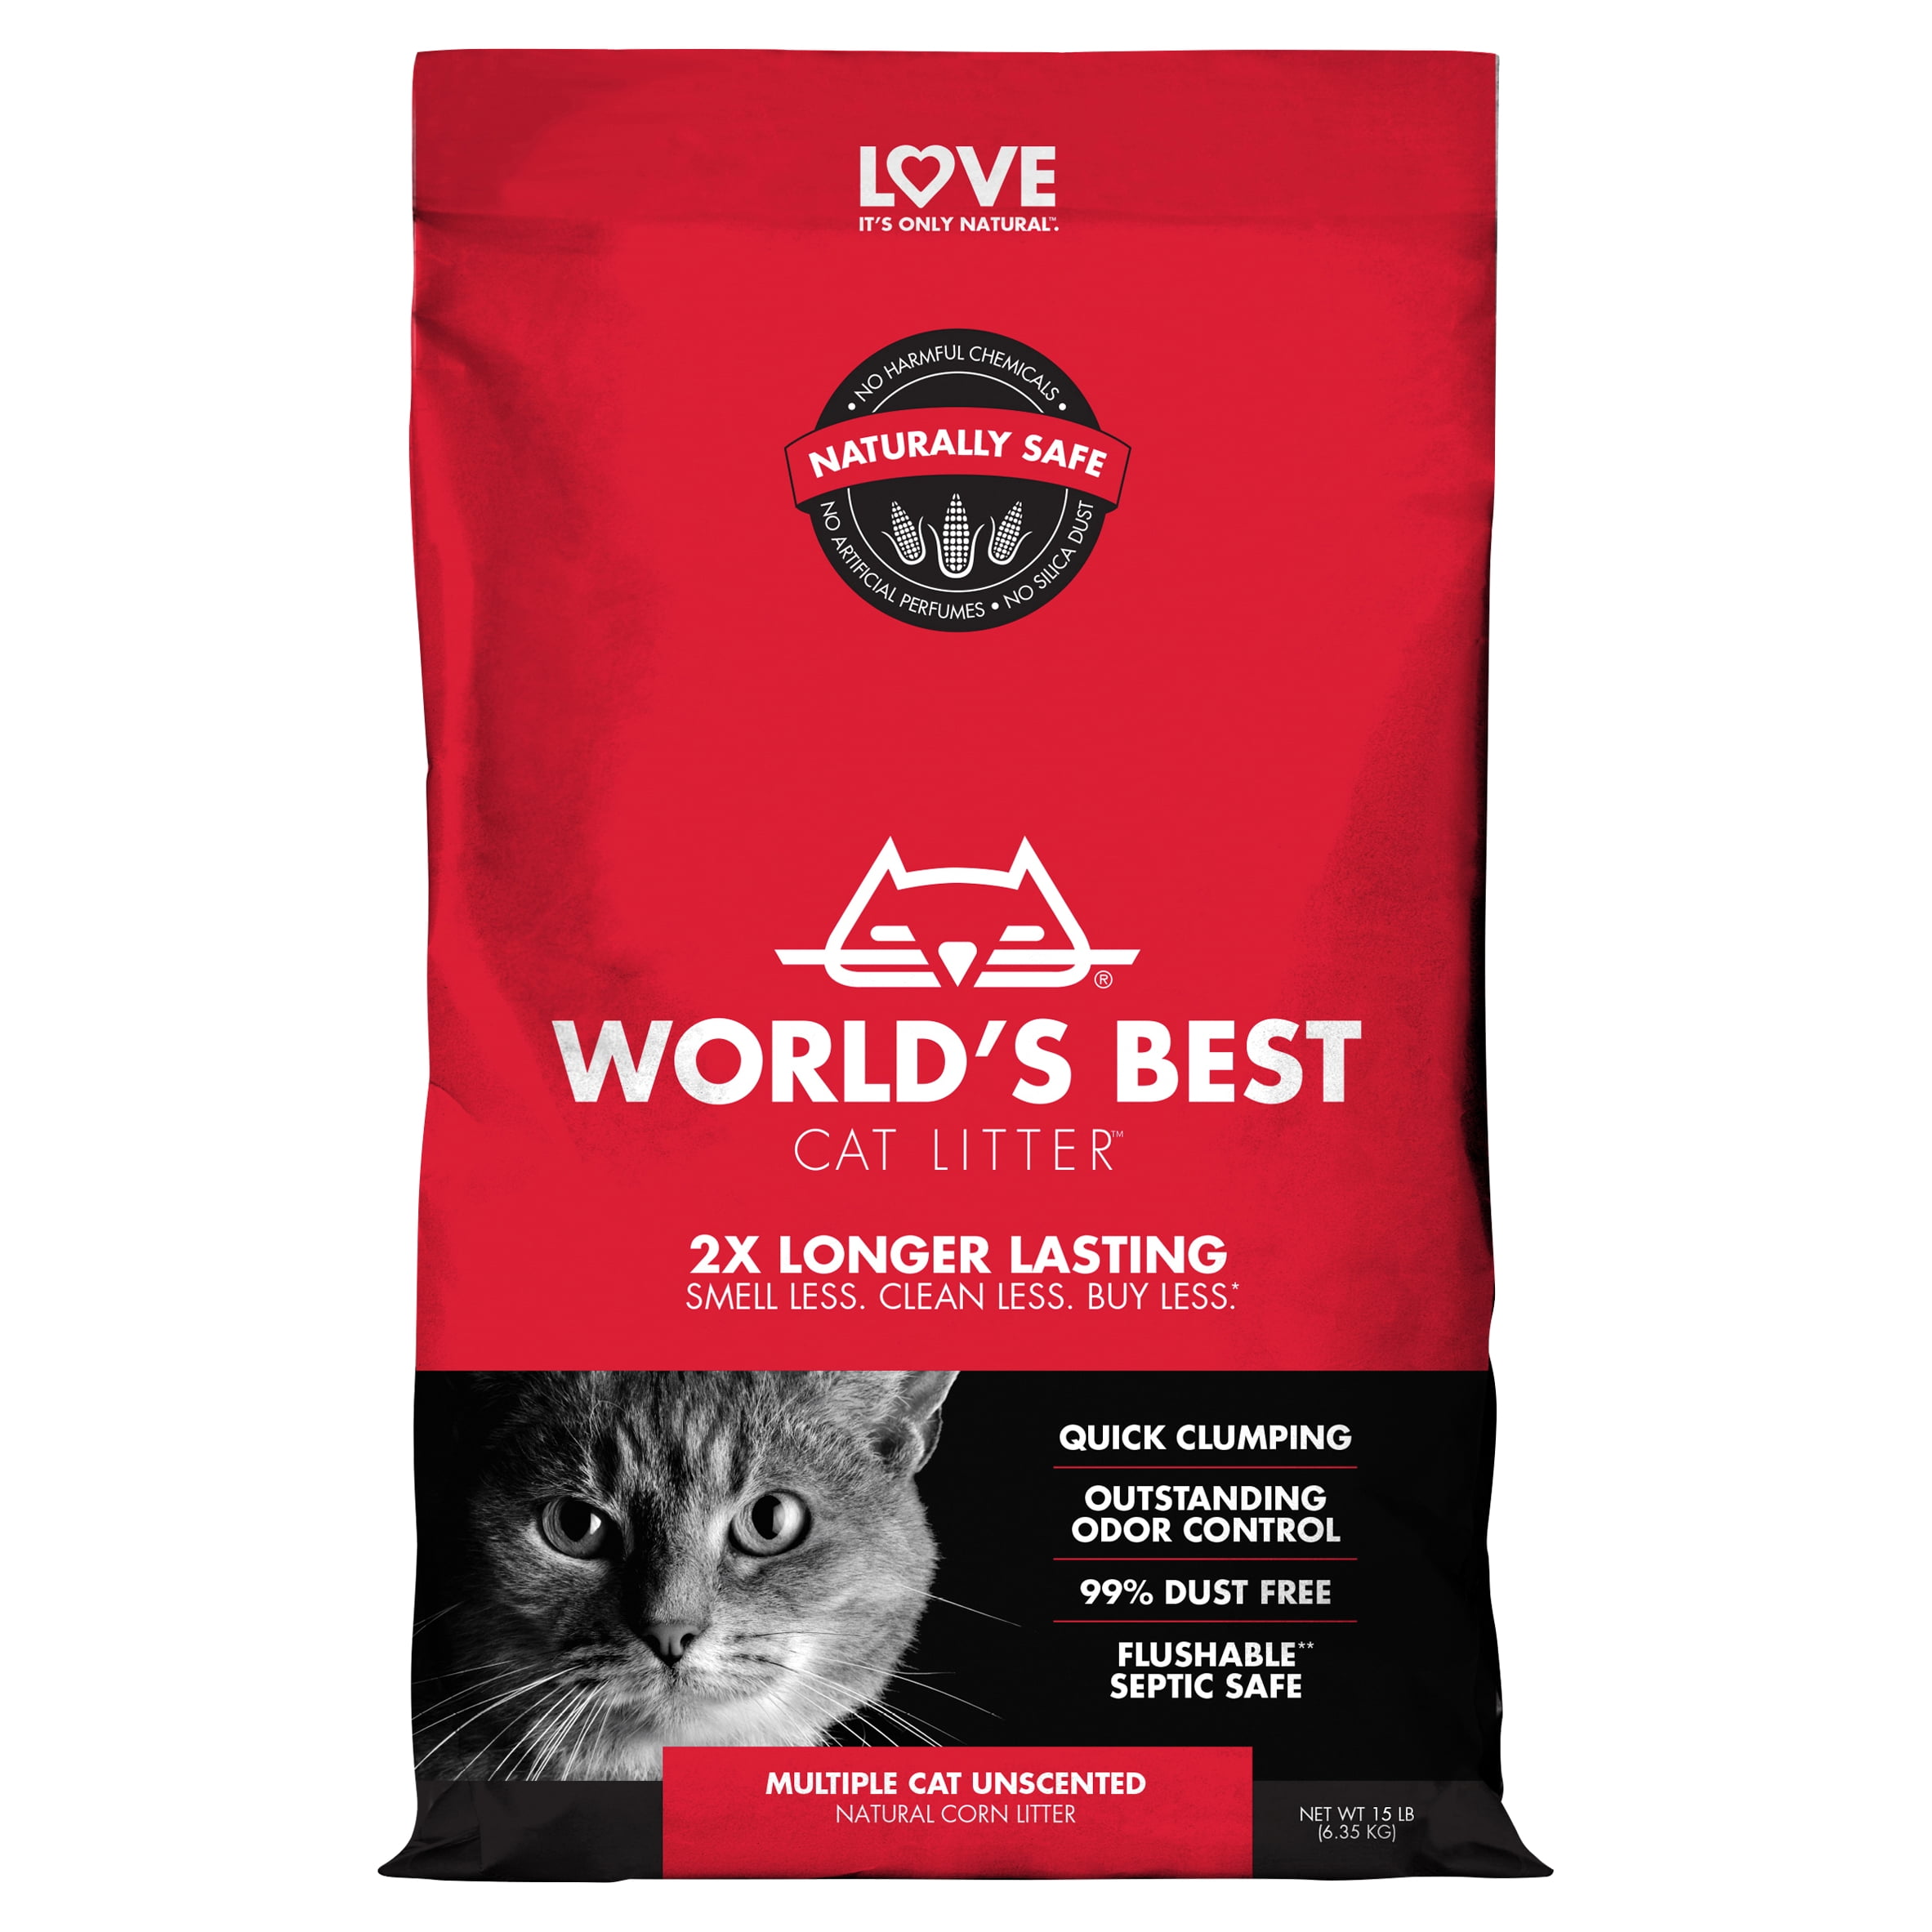 Hypoallergenic Hygiene Granules Lasting Freshness Odour Control 1 Pack*10 Lt ULTRA Extra Strong Clumping Cat Litter Active Carbon Goldlife Cat Litter %100 Natural